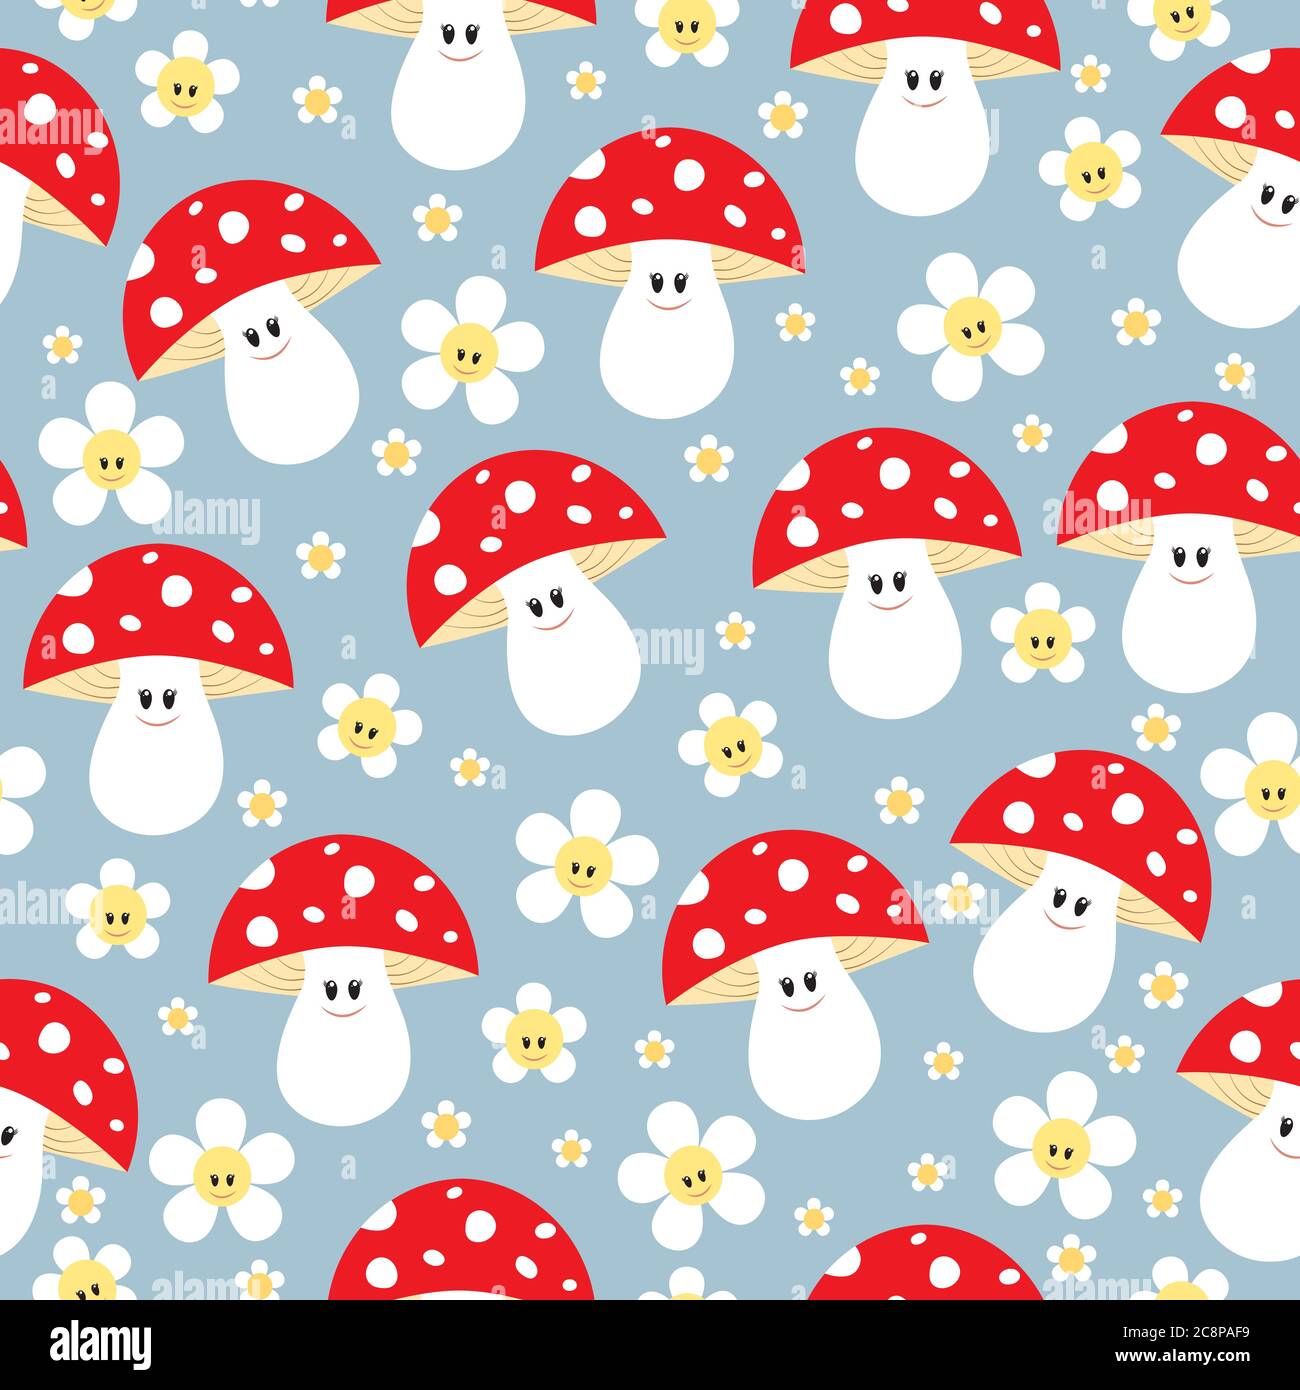 Seamless Pattern With Mushrooms And Flowers It Can Be Used For